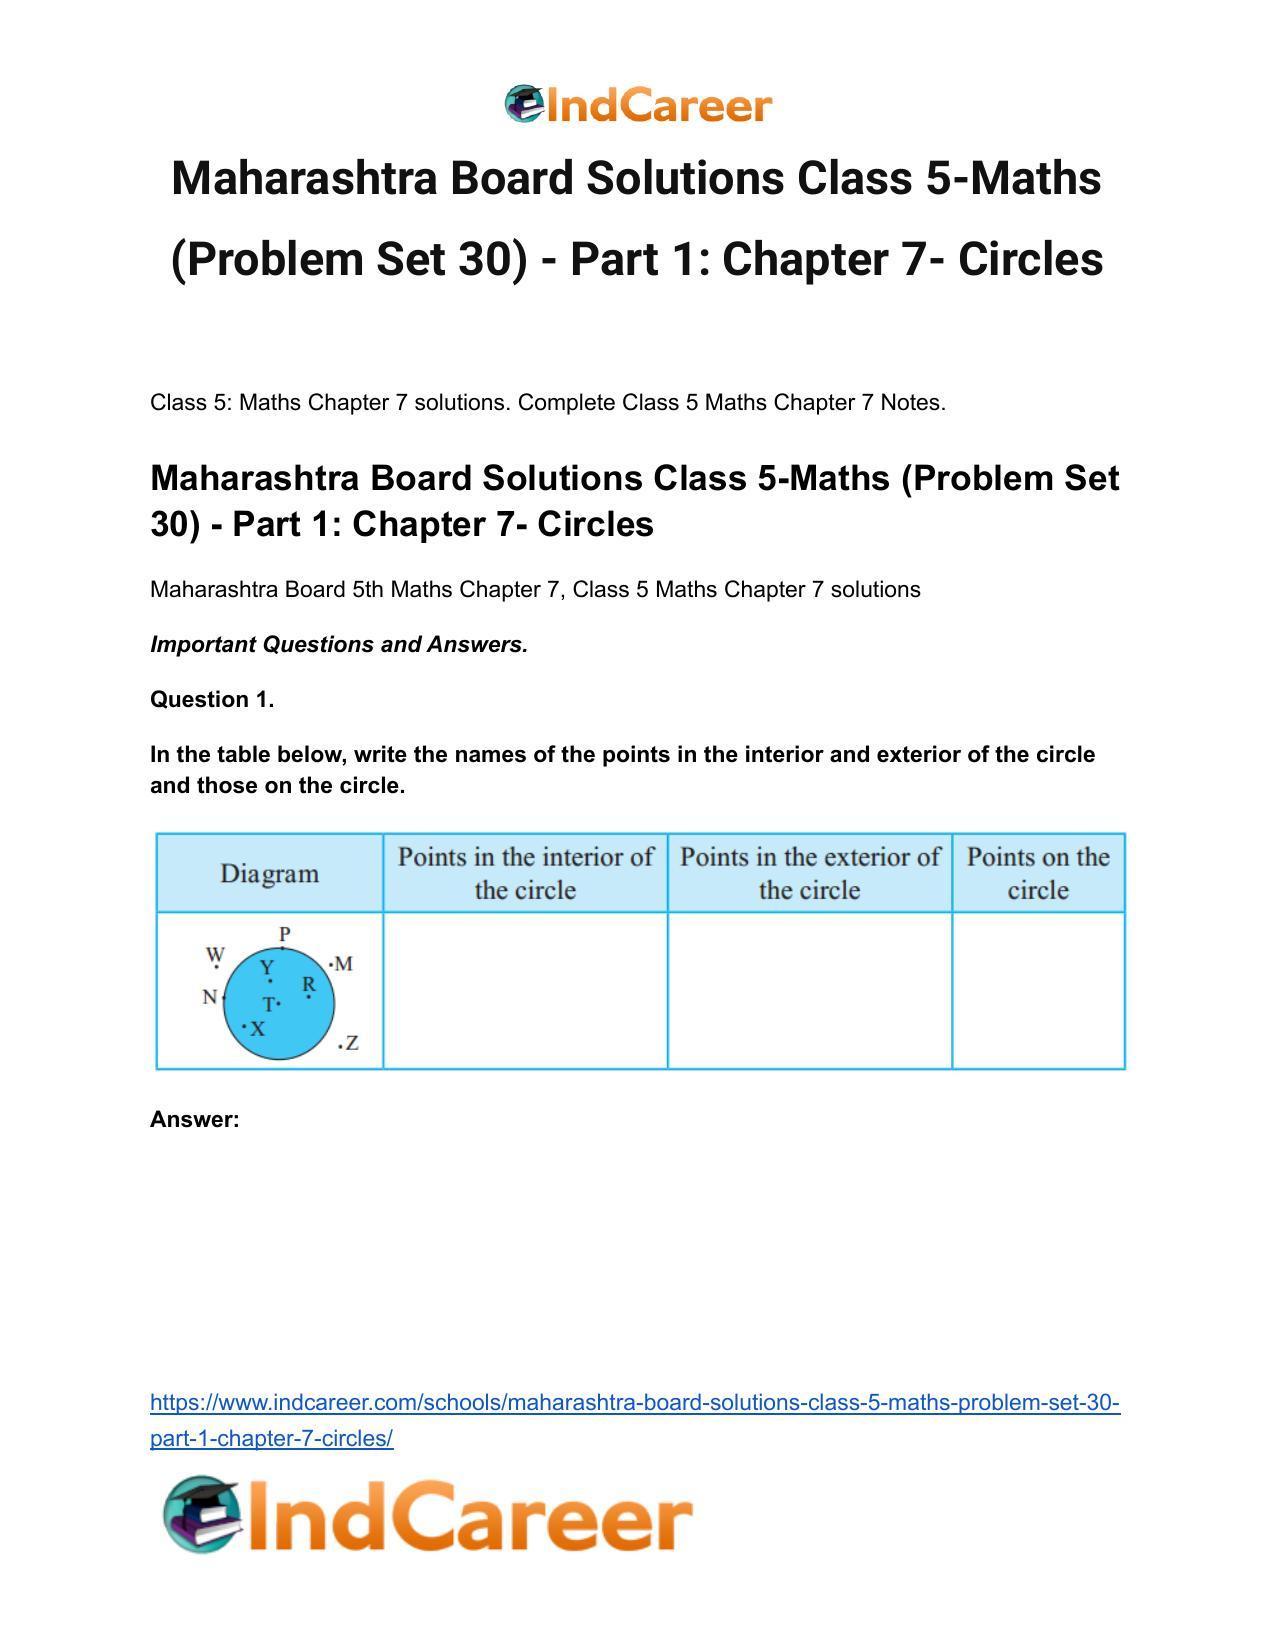 Maharashtra Board Solutions Class 5-Maths (Problem Set 30) - Part 1: Chapter 7- Circles - Page 2